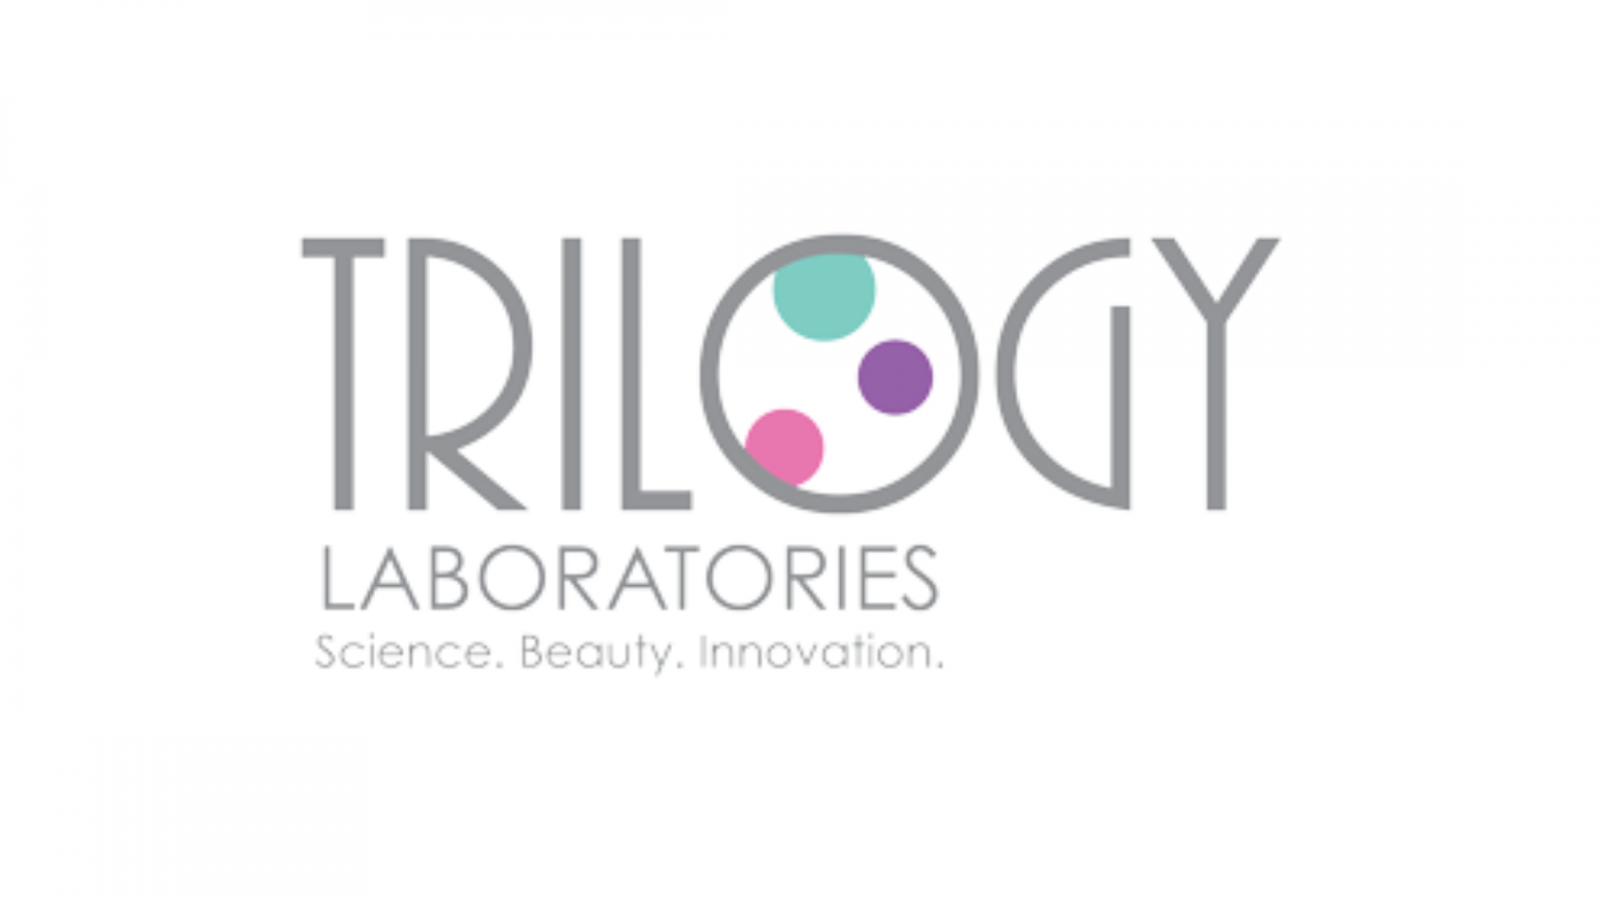 Trilogy Laboratories launches Screen Saver serum to shield skin from blue light damage